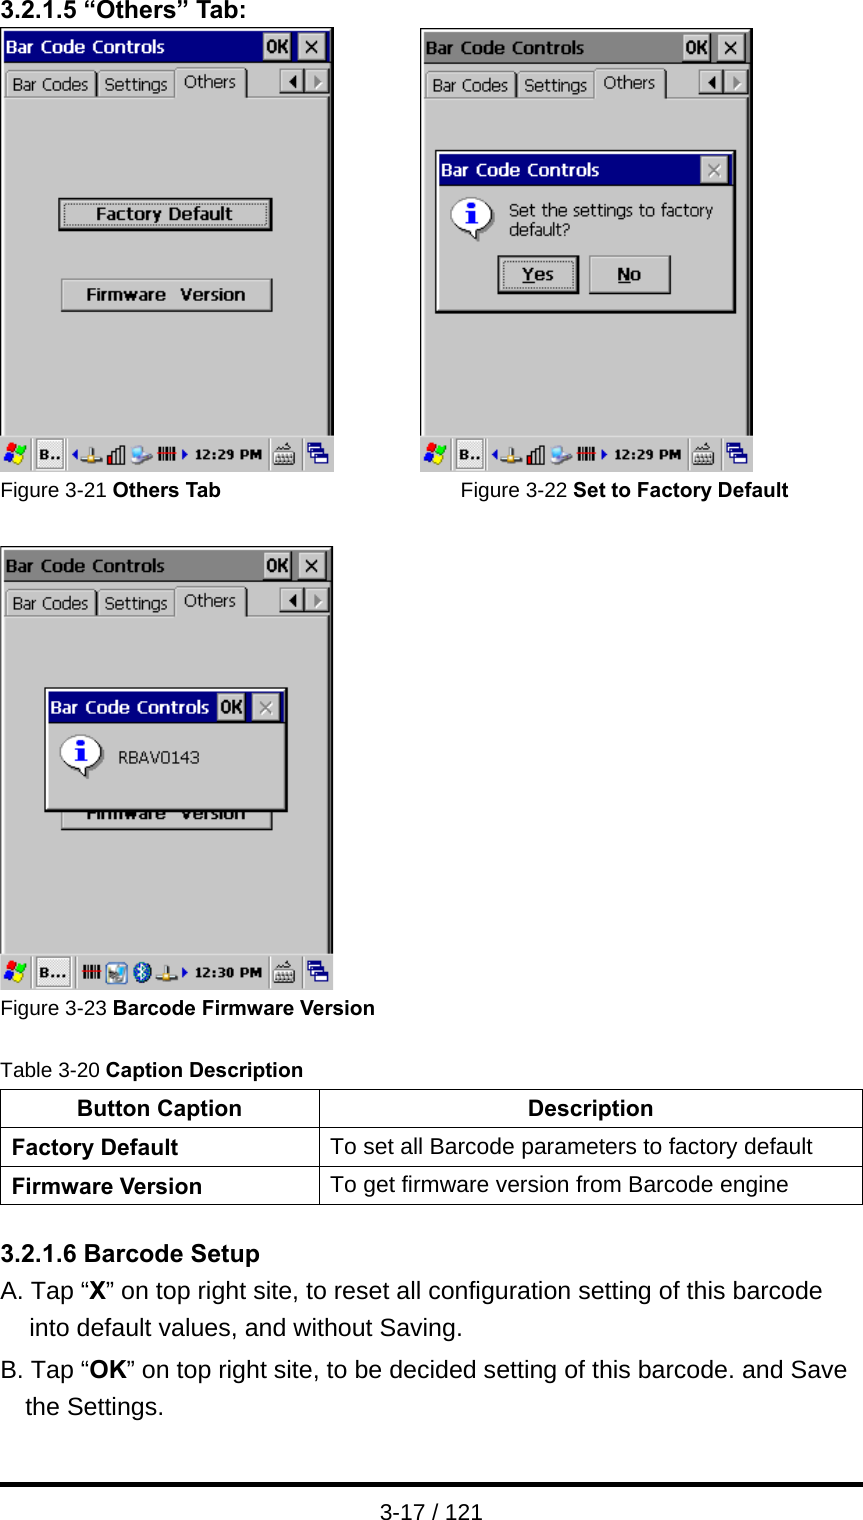  3-17 / 121 3.2.1.5 “Others” Tab:          Figure 3-21 Others Tab                       Figure 3-22 Set to Factory Default   Figure 3-23 Barcode Firmware Version  Table 3-20 Caption Description Button Caption  Description Factory Default  To set all Barcode parameters to factory default Firmware Version  To get firmware version from Barcode engine  3.2.1.6 Barcode Setup A. Tap “X” on top right site, to reset all configuration setting of this barcode   into default values, and without Saving. B. Tap “OK” on top right site, to be decided setting of this barcode. and Save the Settings. 